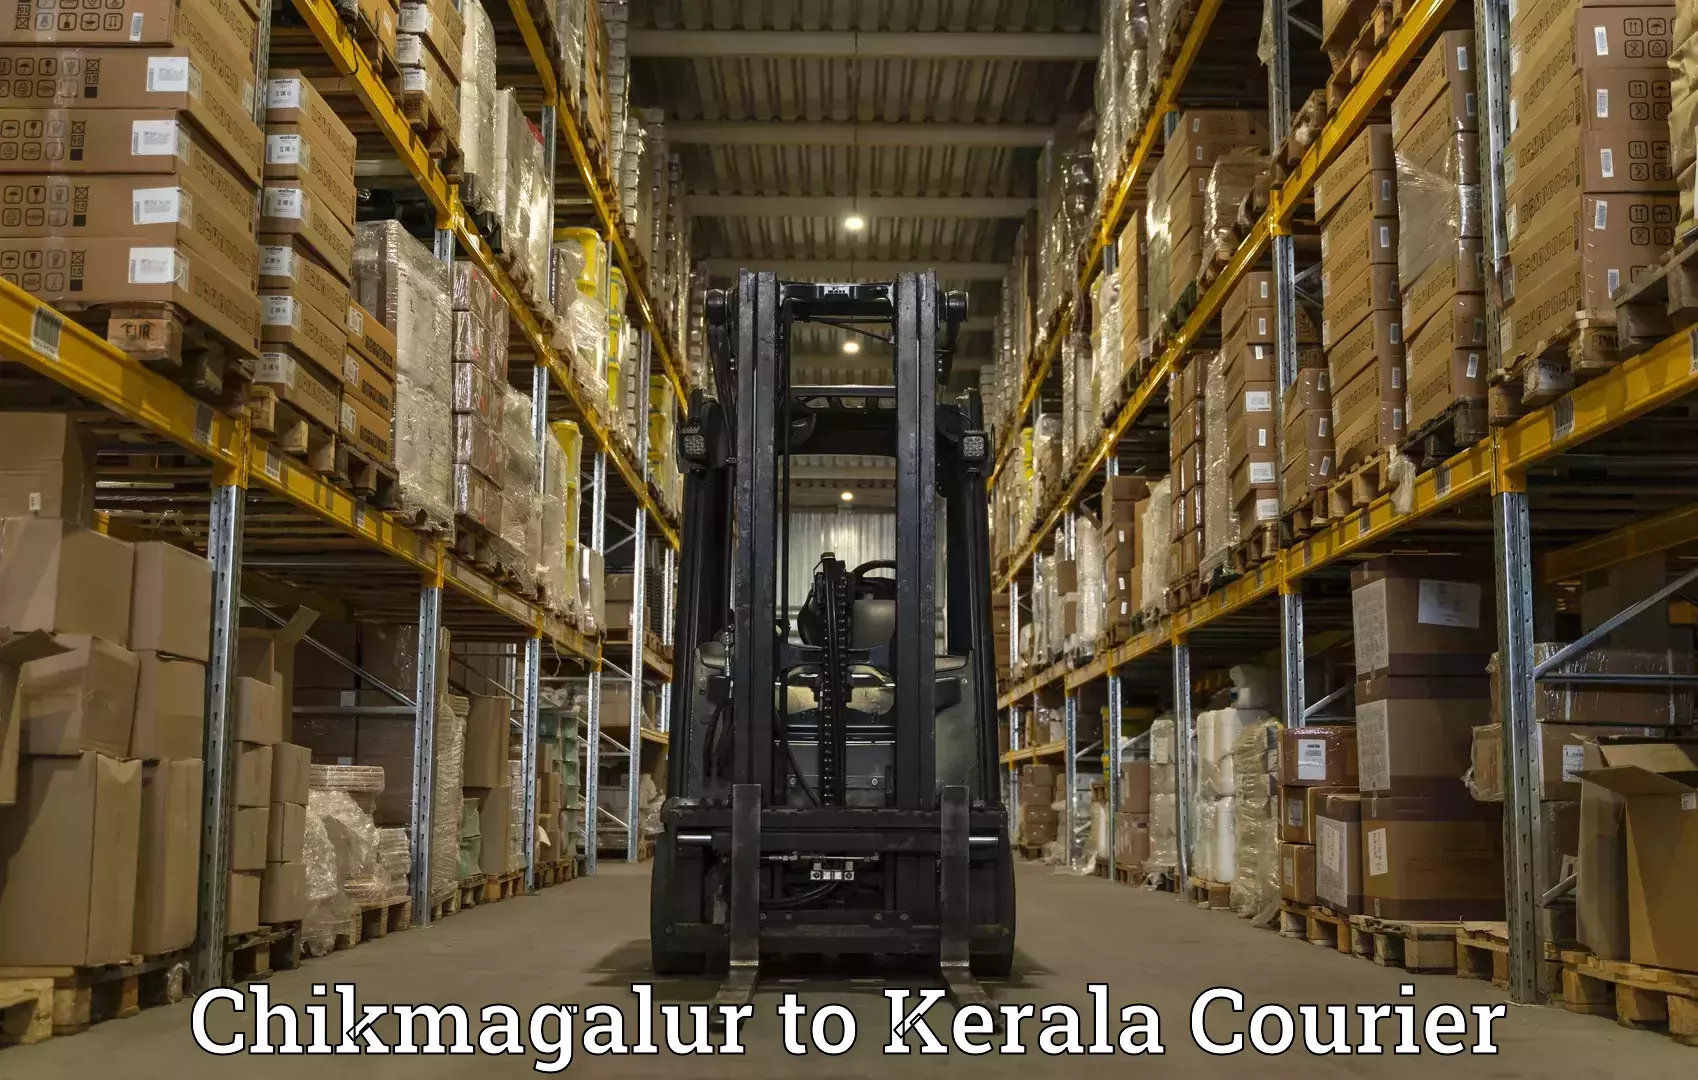 24/7 courier service Chikmagalur to Cochin Port Kochi